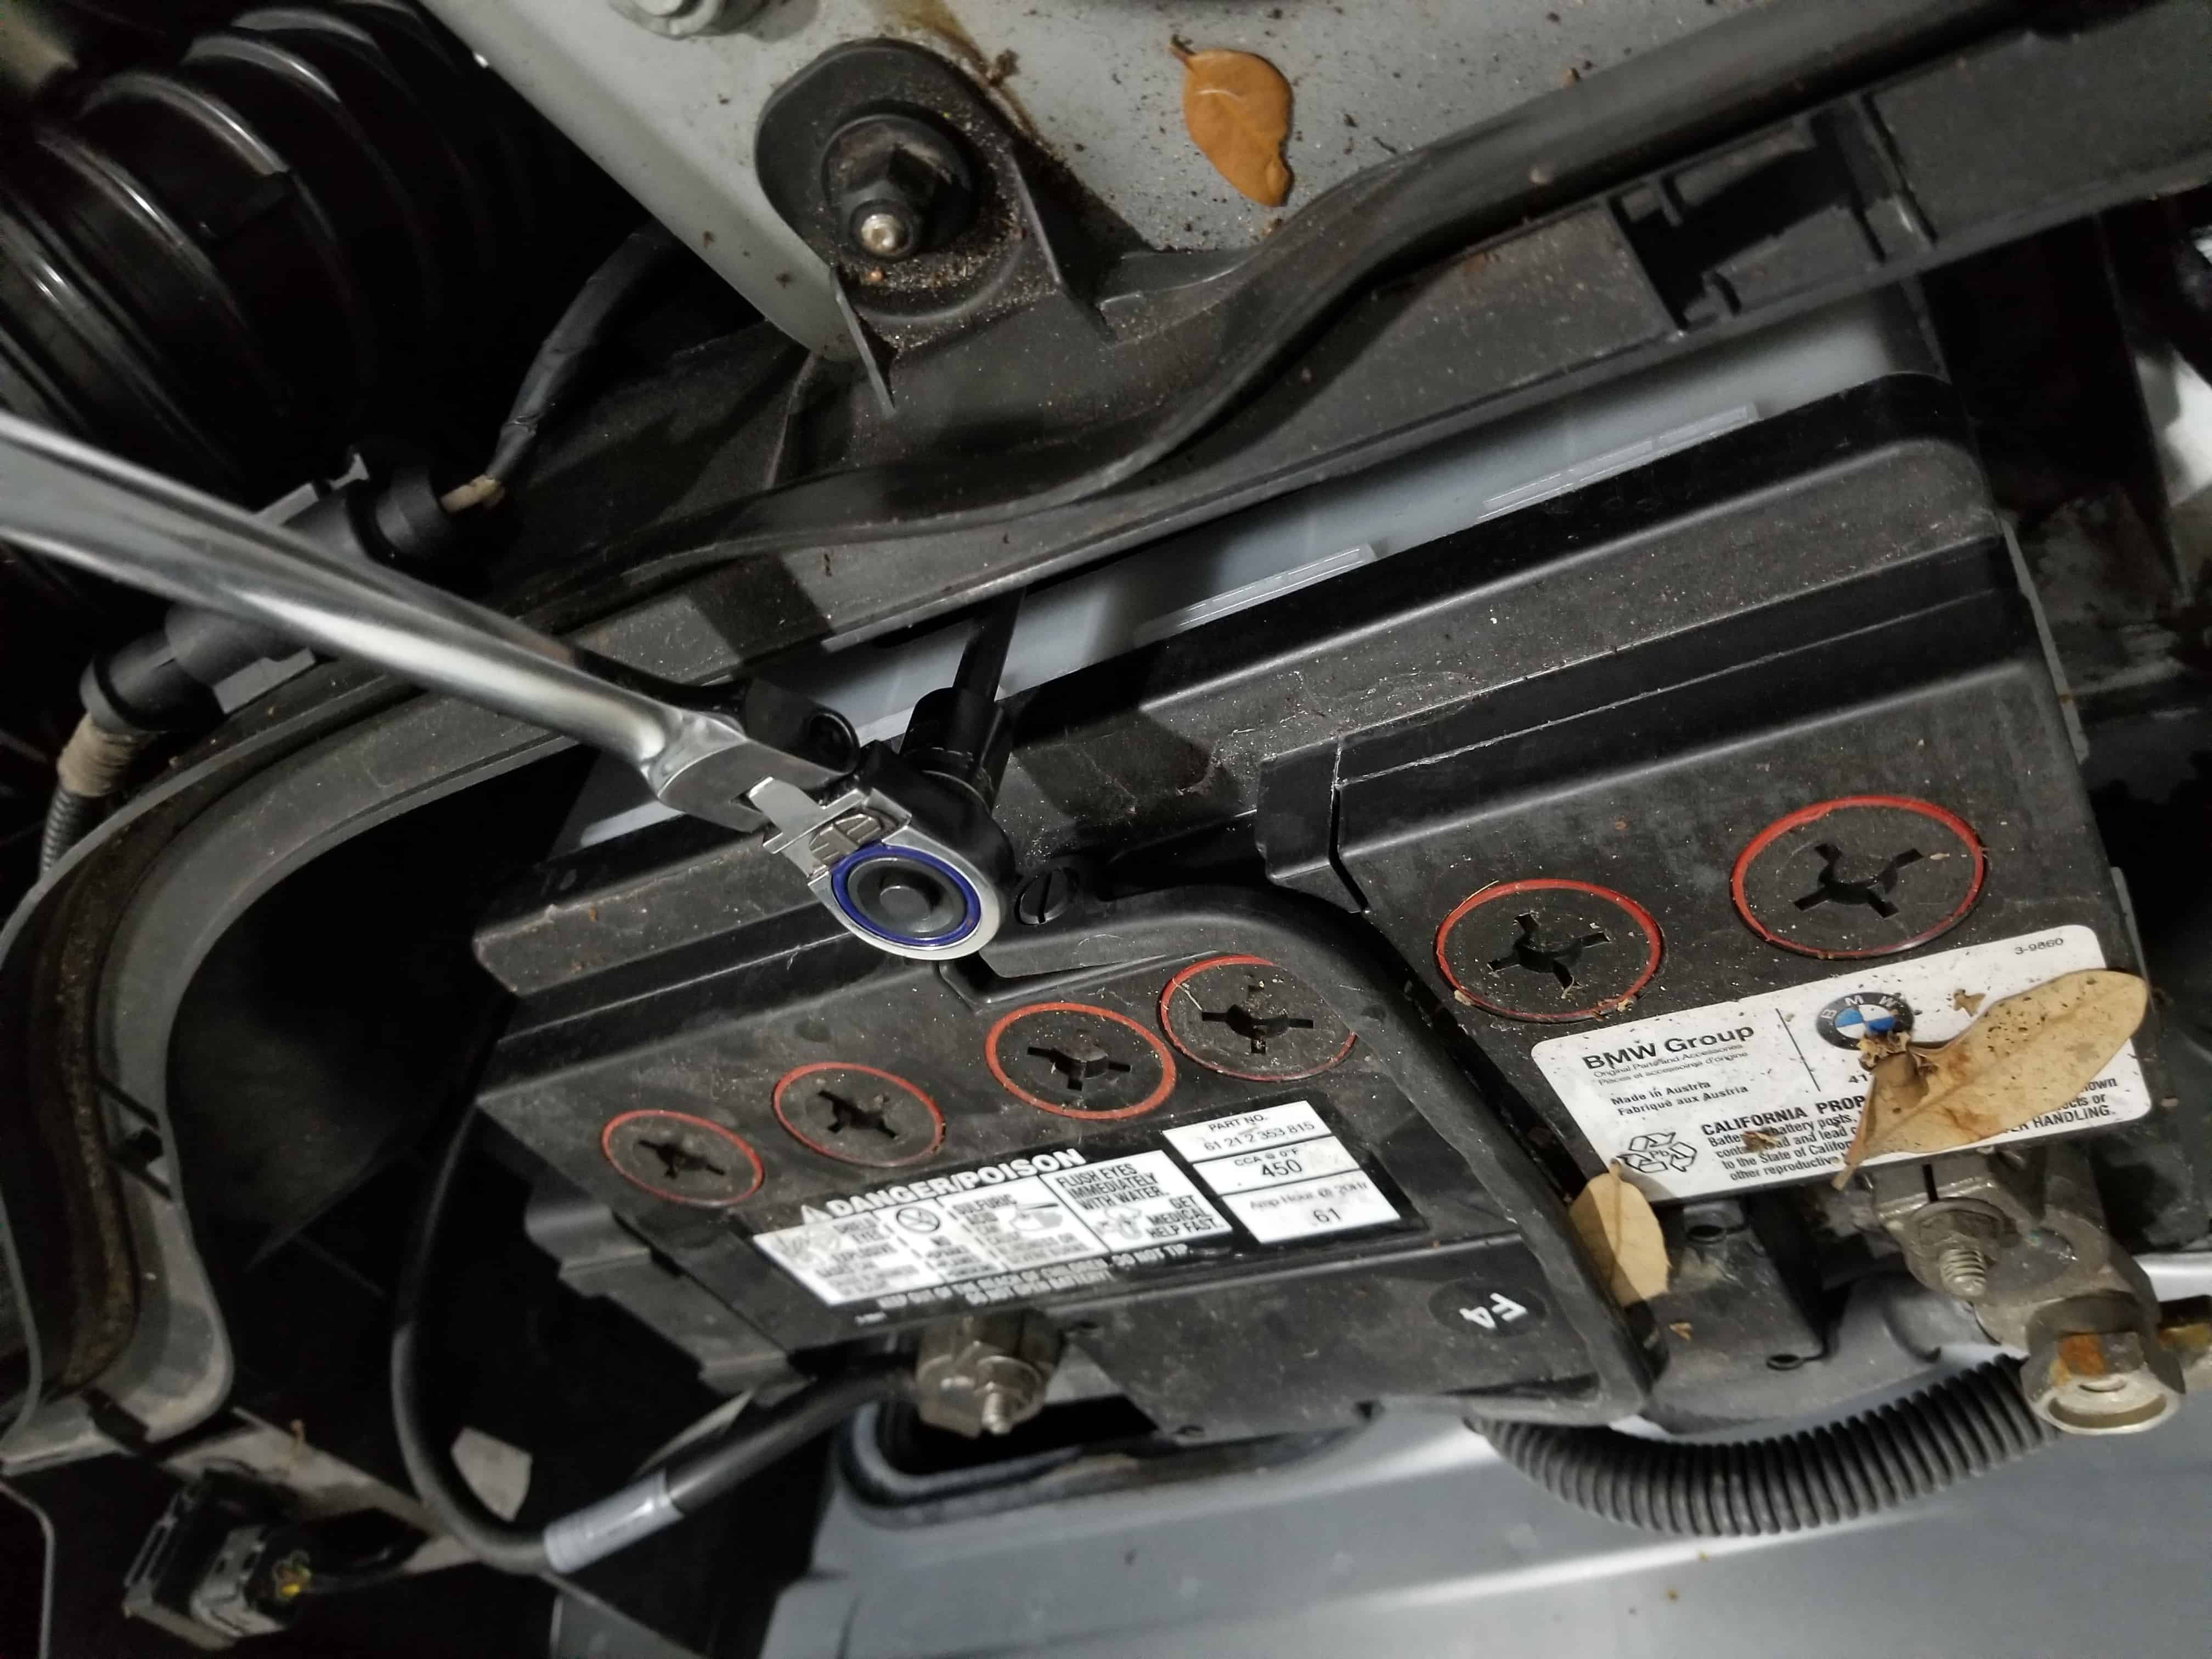 MINI R56 battery replacement - remove battery hold down bracket